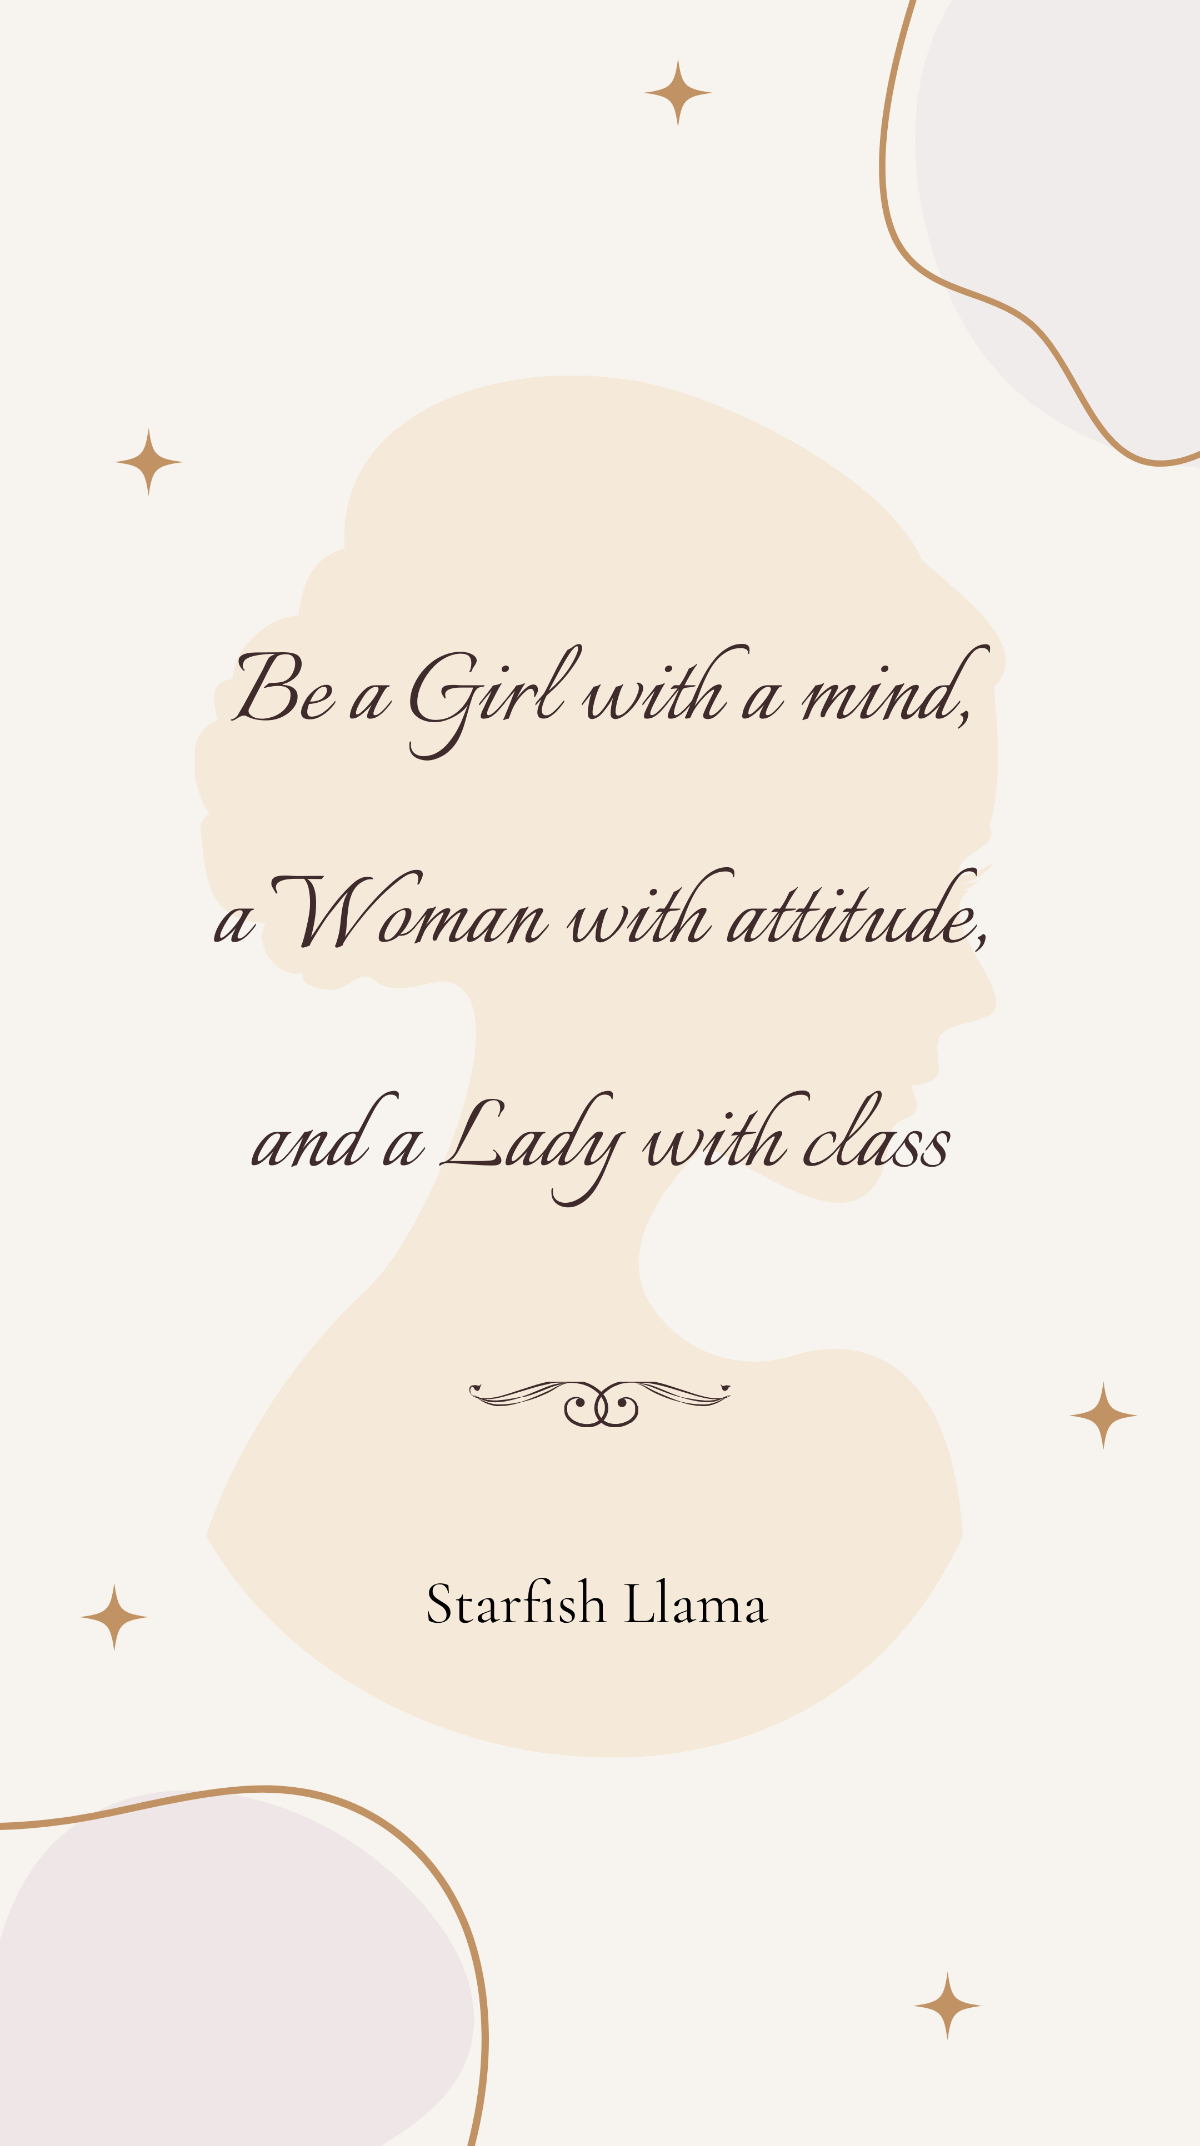 Starfish Llama - Be a Girl with a mind, a Woman with attitude, and a Lady with class Template